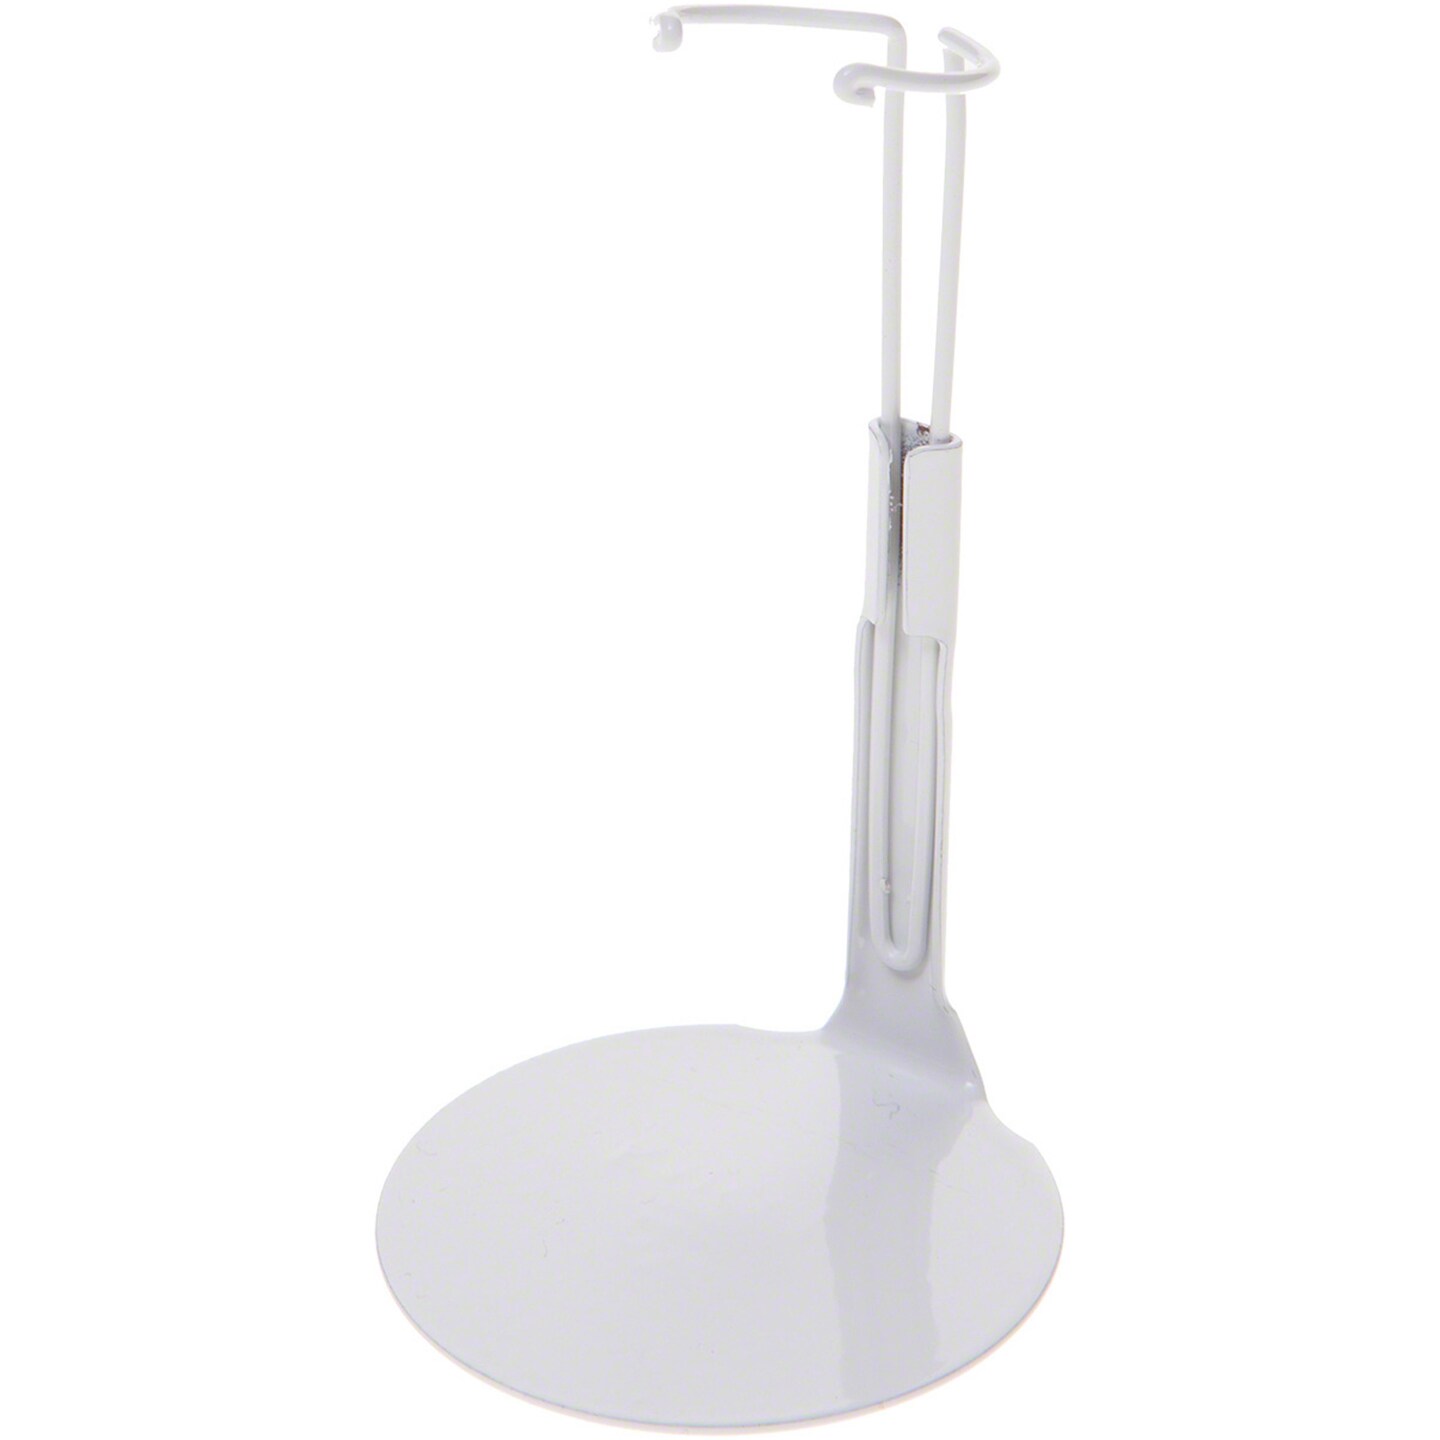 Kaiser 1101 White Adjustable Doll Stand, fits 5 to 6 inch Dolls, waist width adjusts from 0.75 to 1 inches